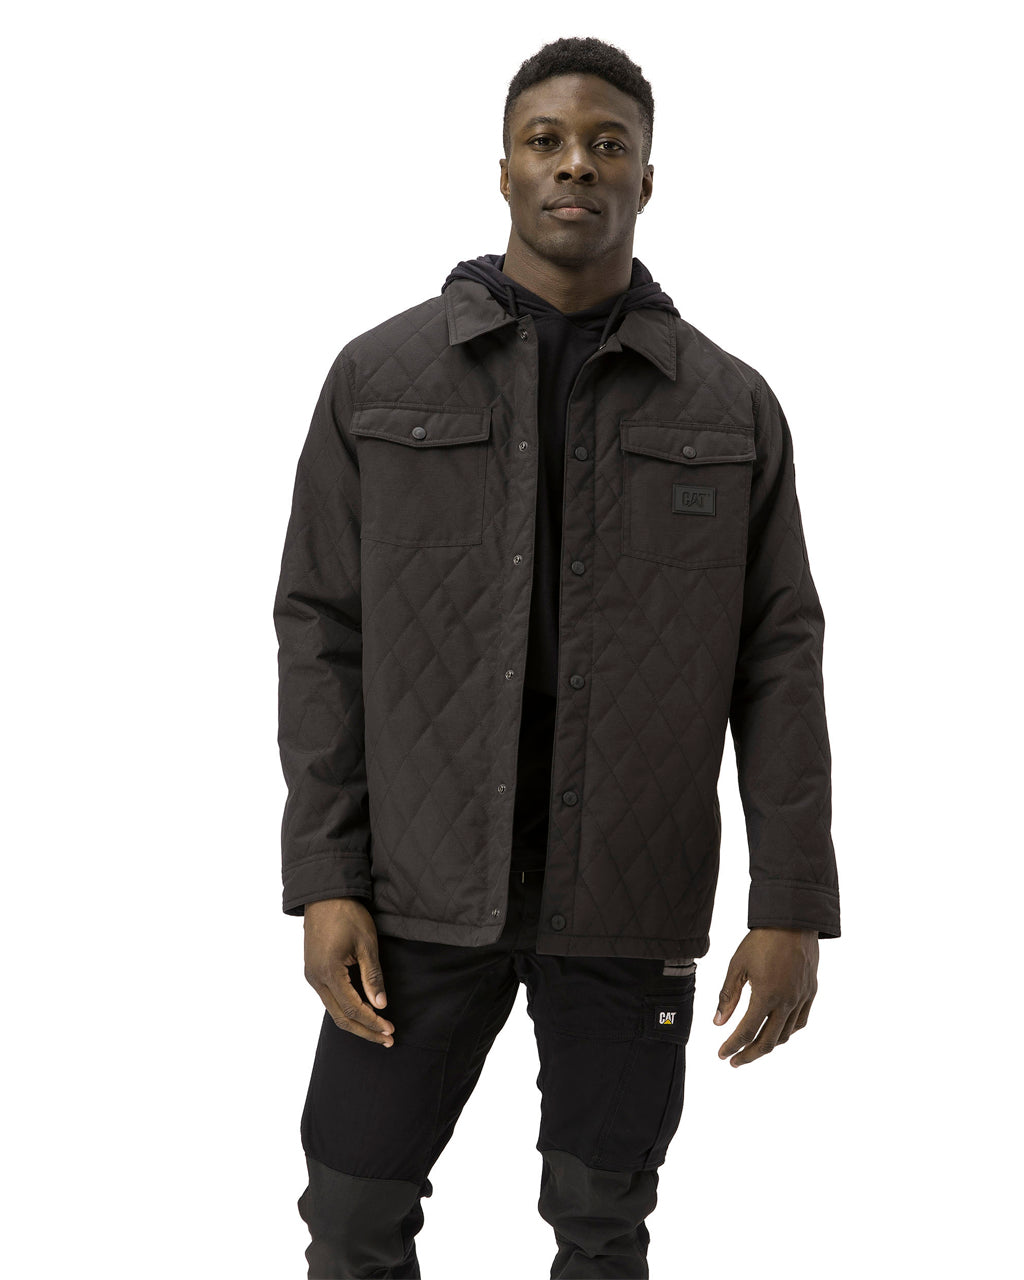 CAT Men's Quilted Ripstop Shirt Jacket - Work World - Workwear, Work Boots, Safety Gear